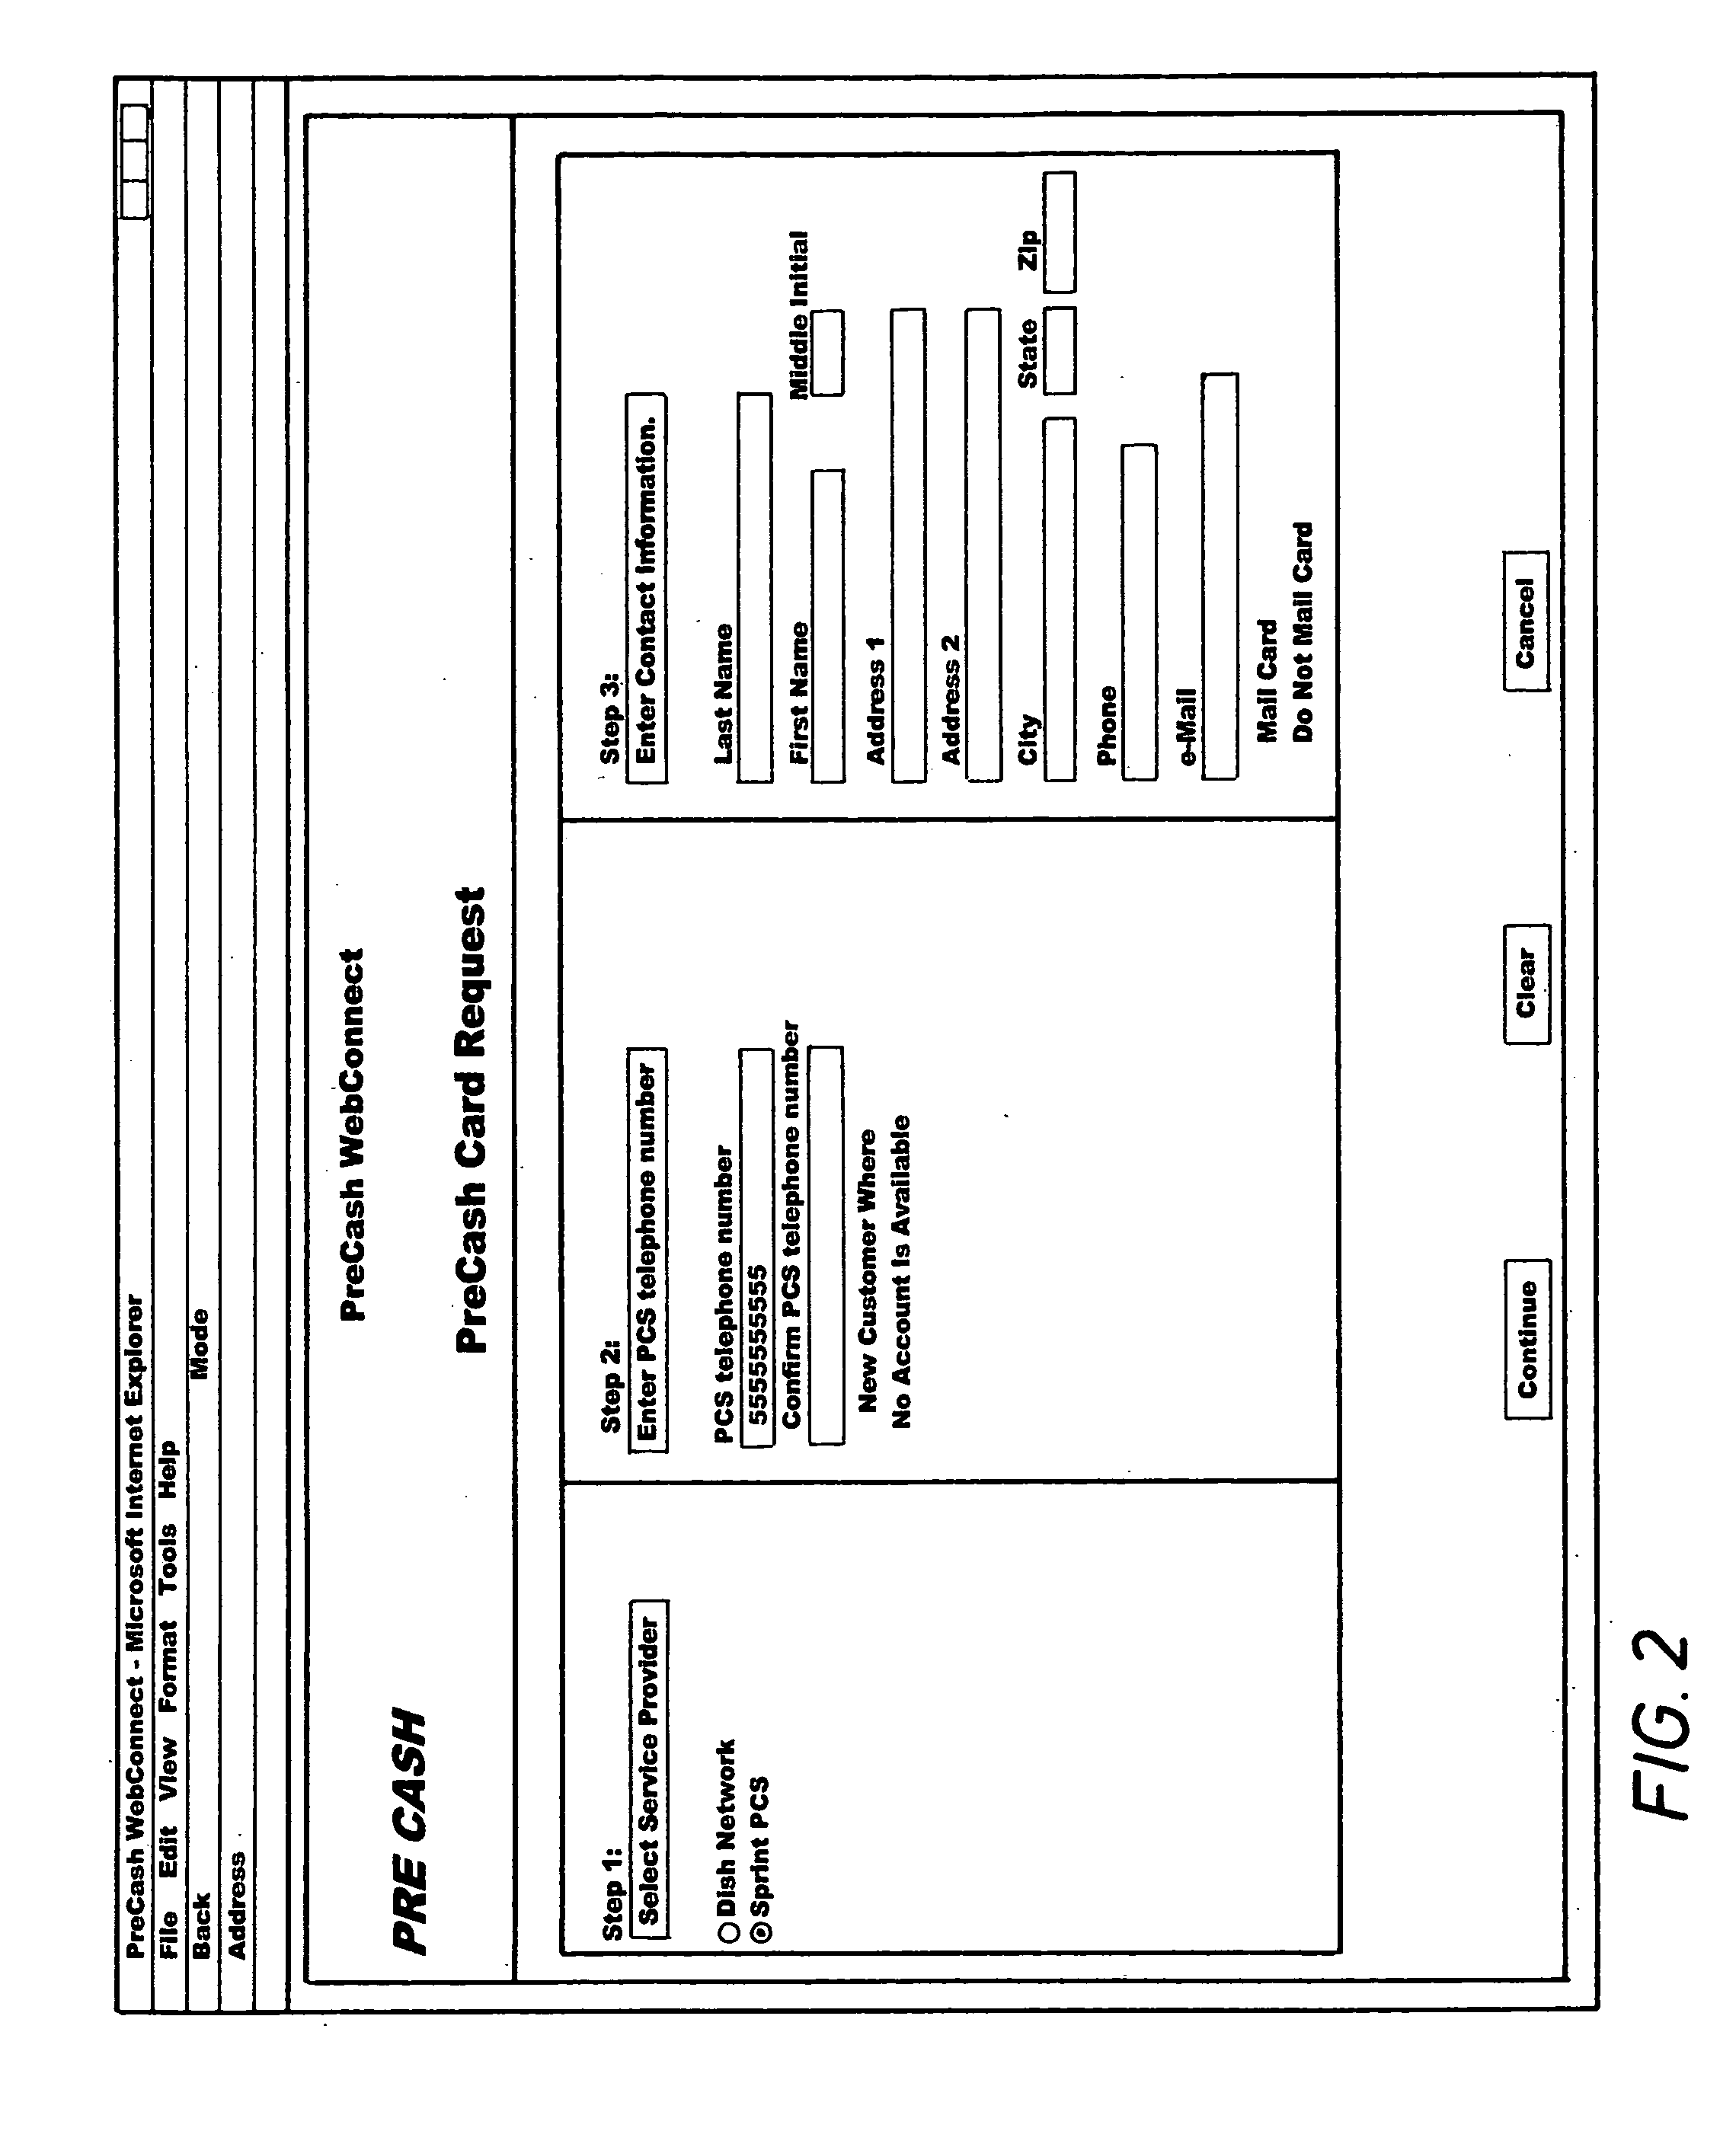 System and method for facilitating large scale payment transactions